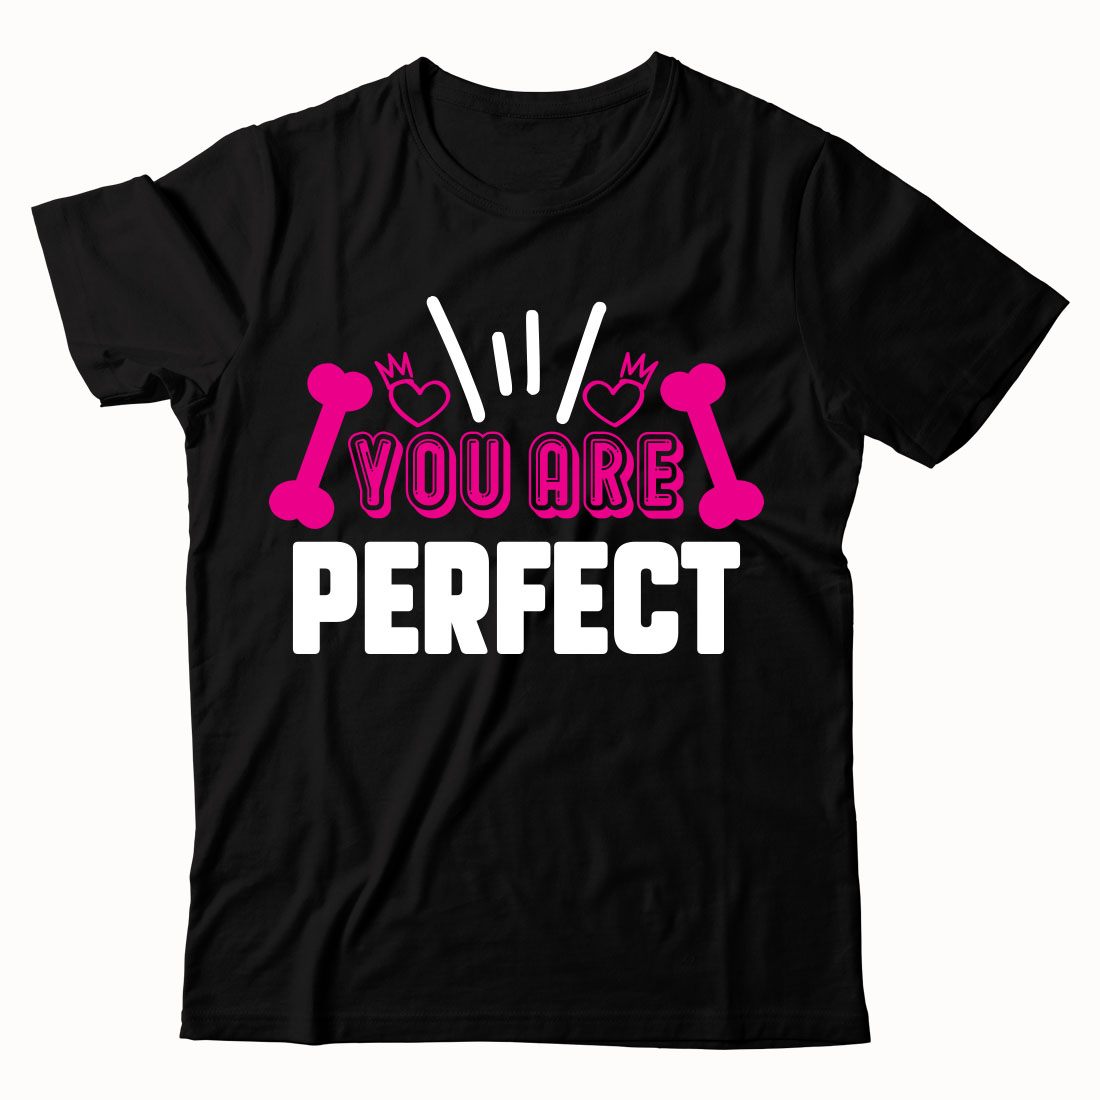 T - shirt that says you are perfect.